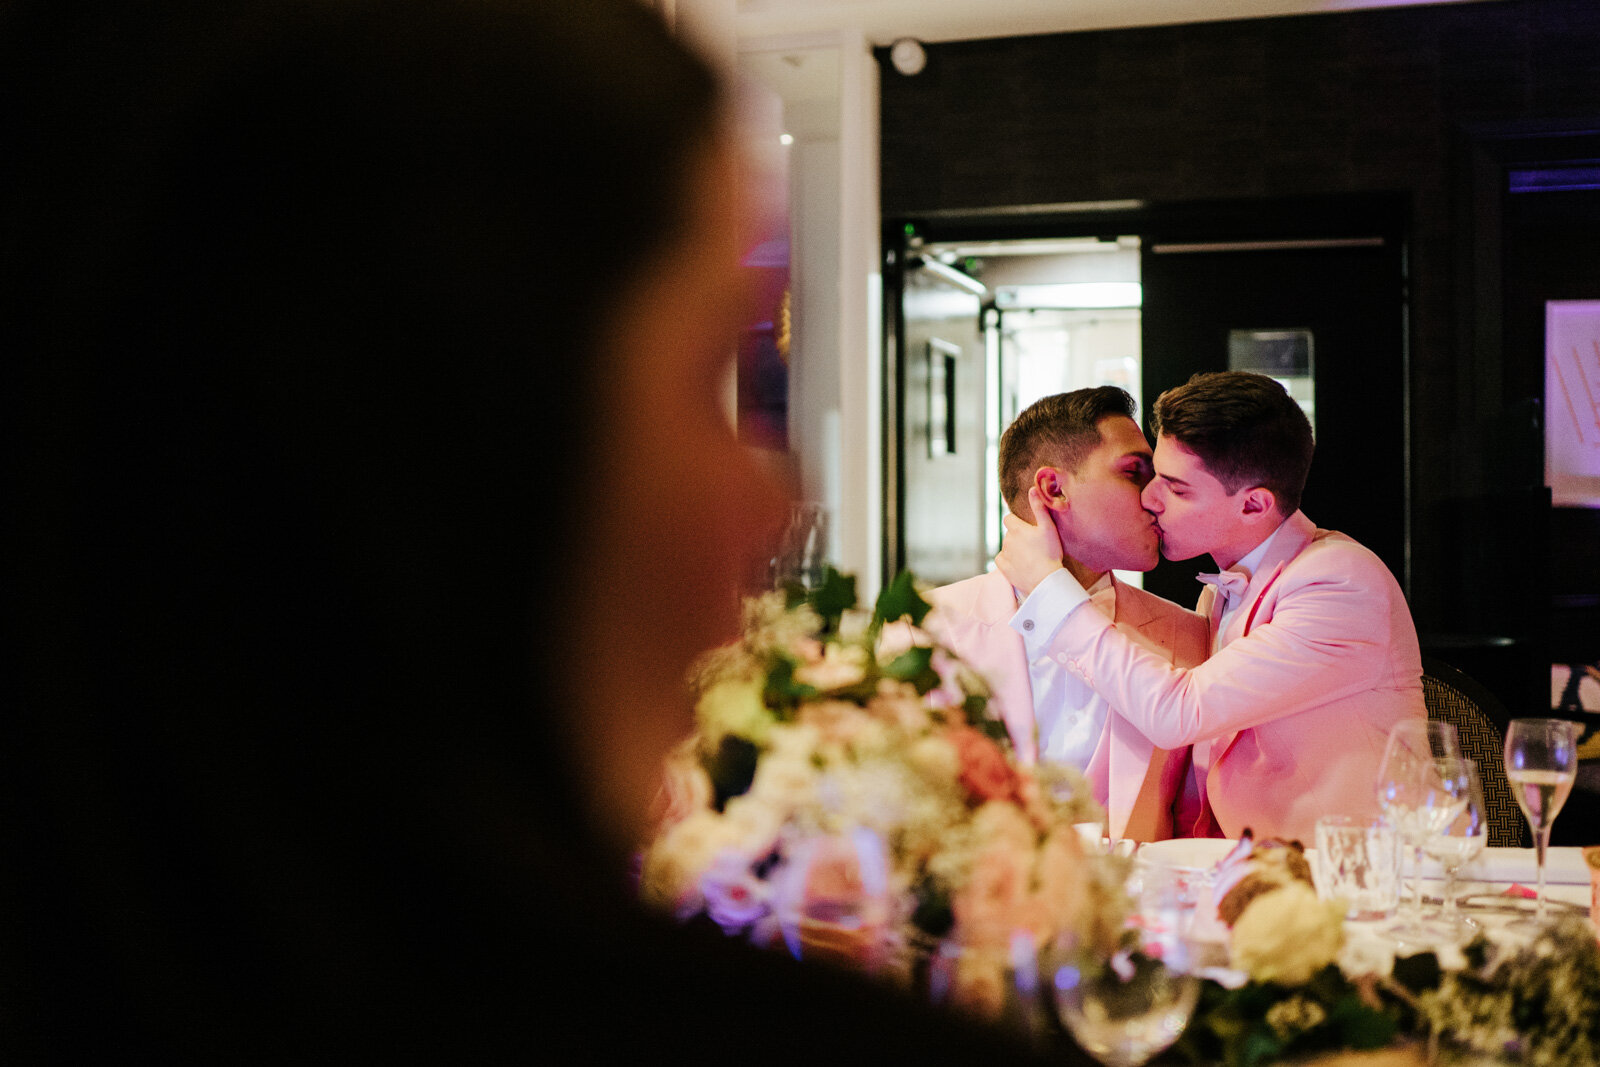  Both grooms kissing at dinner table 